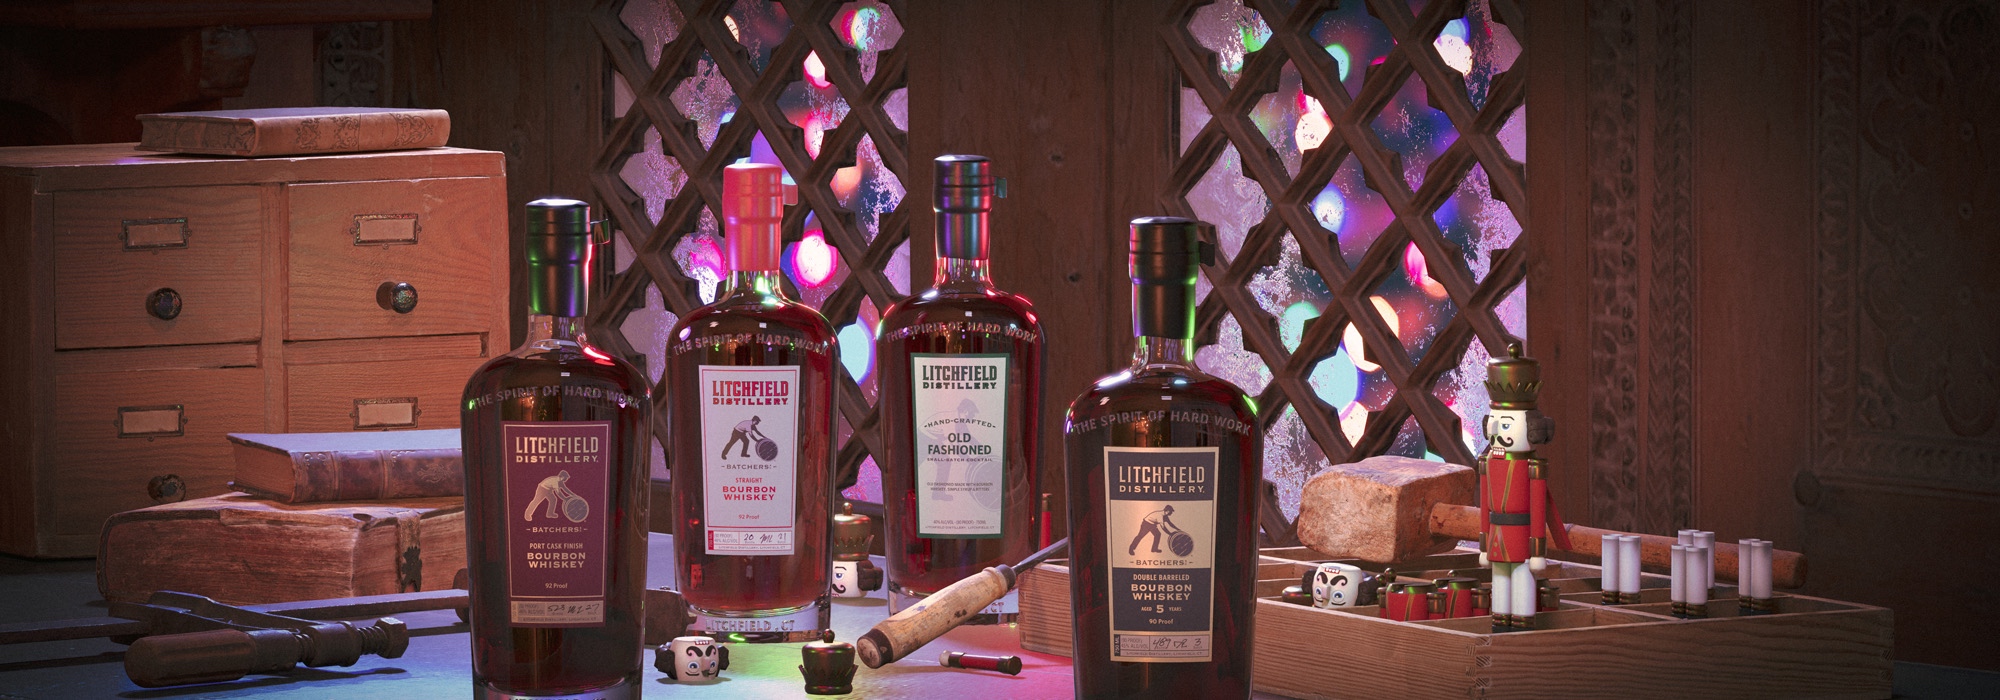 Litchfield Distillery 2022 Holiday Gift Guide